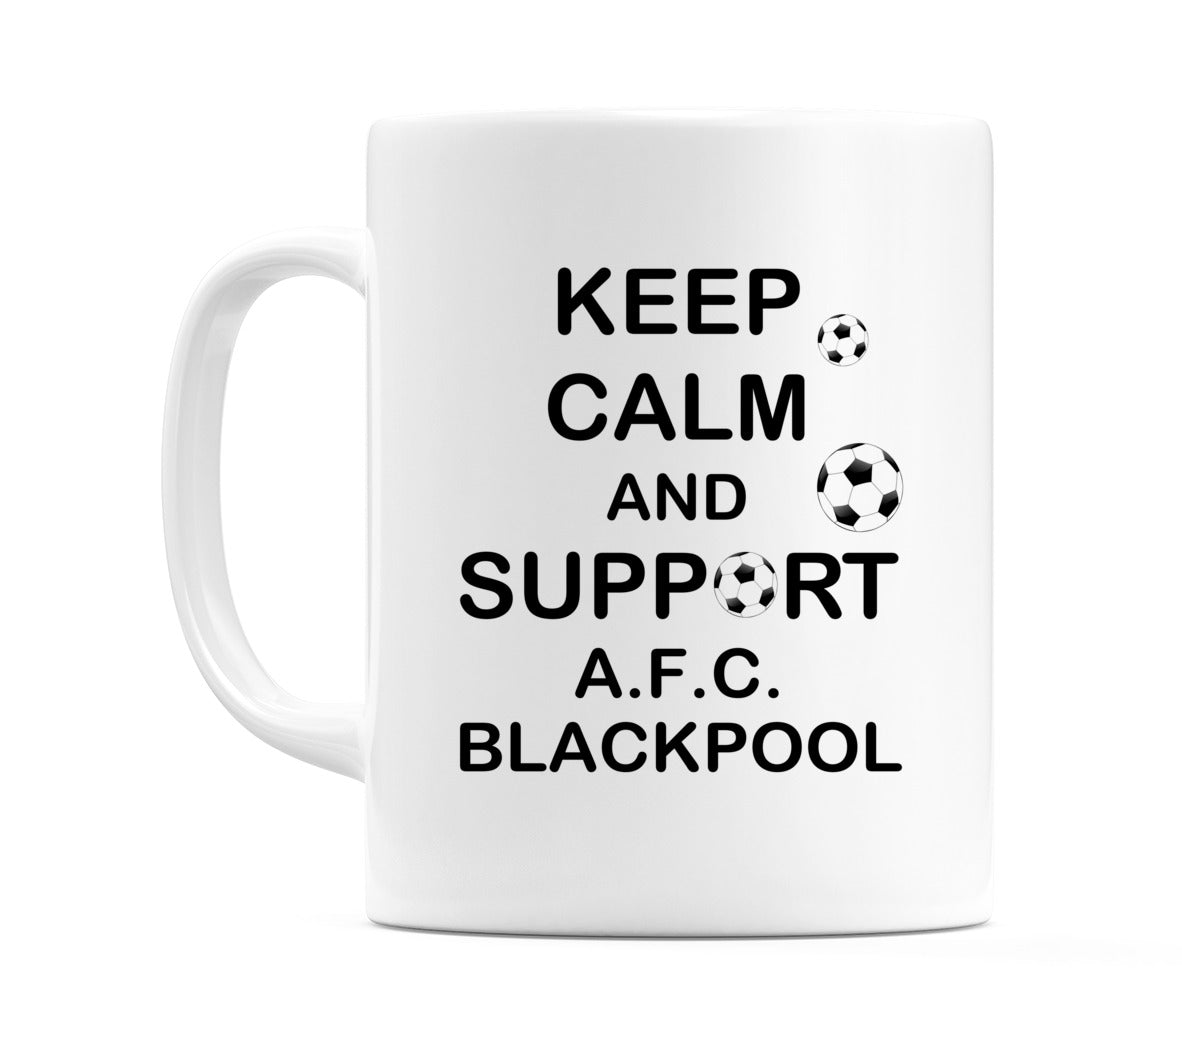 Mug with Keep Calm and Support A.F.C. Blackpool written on it.